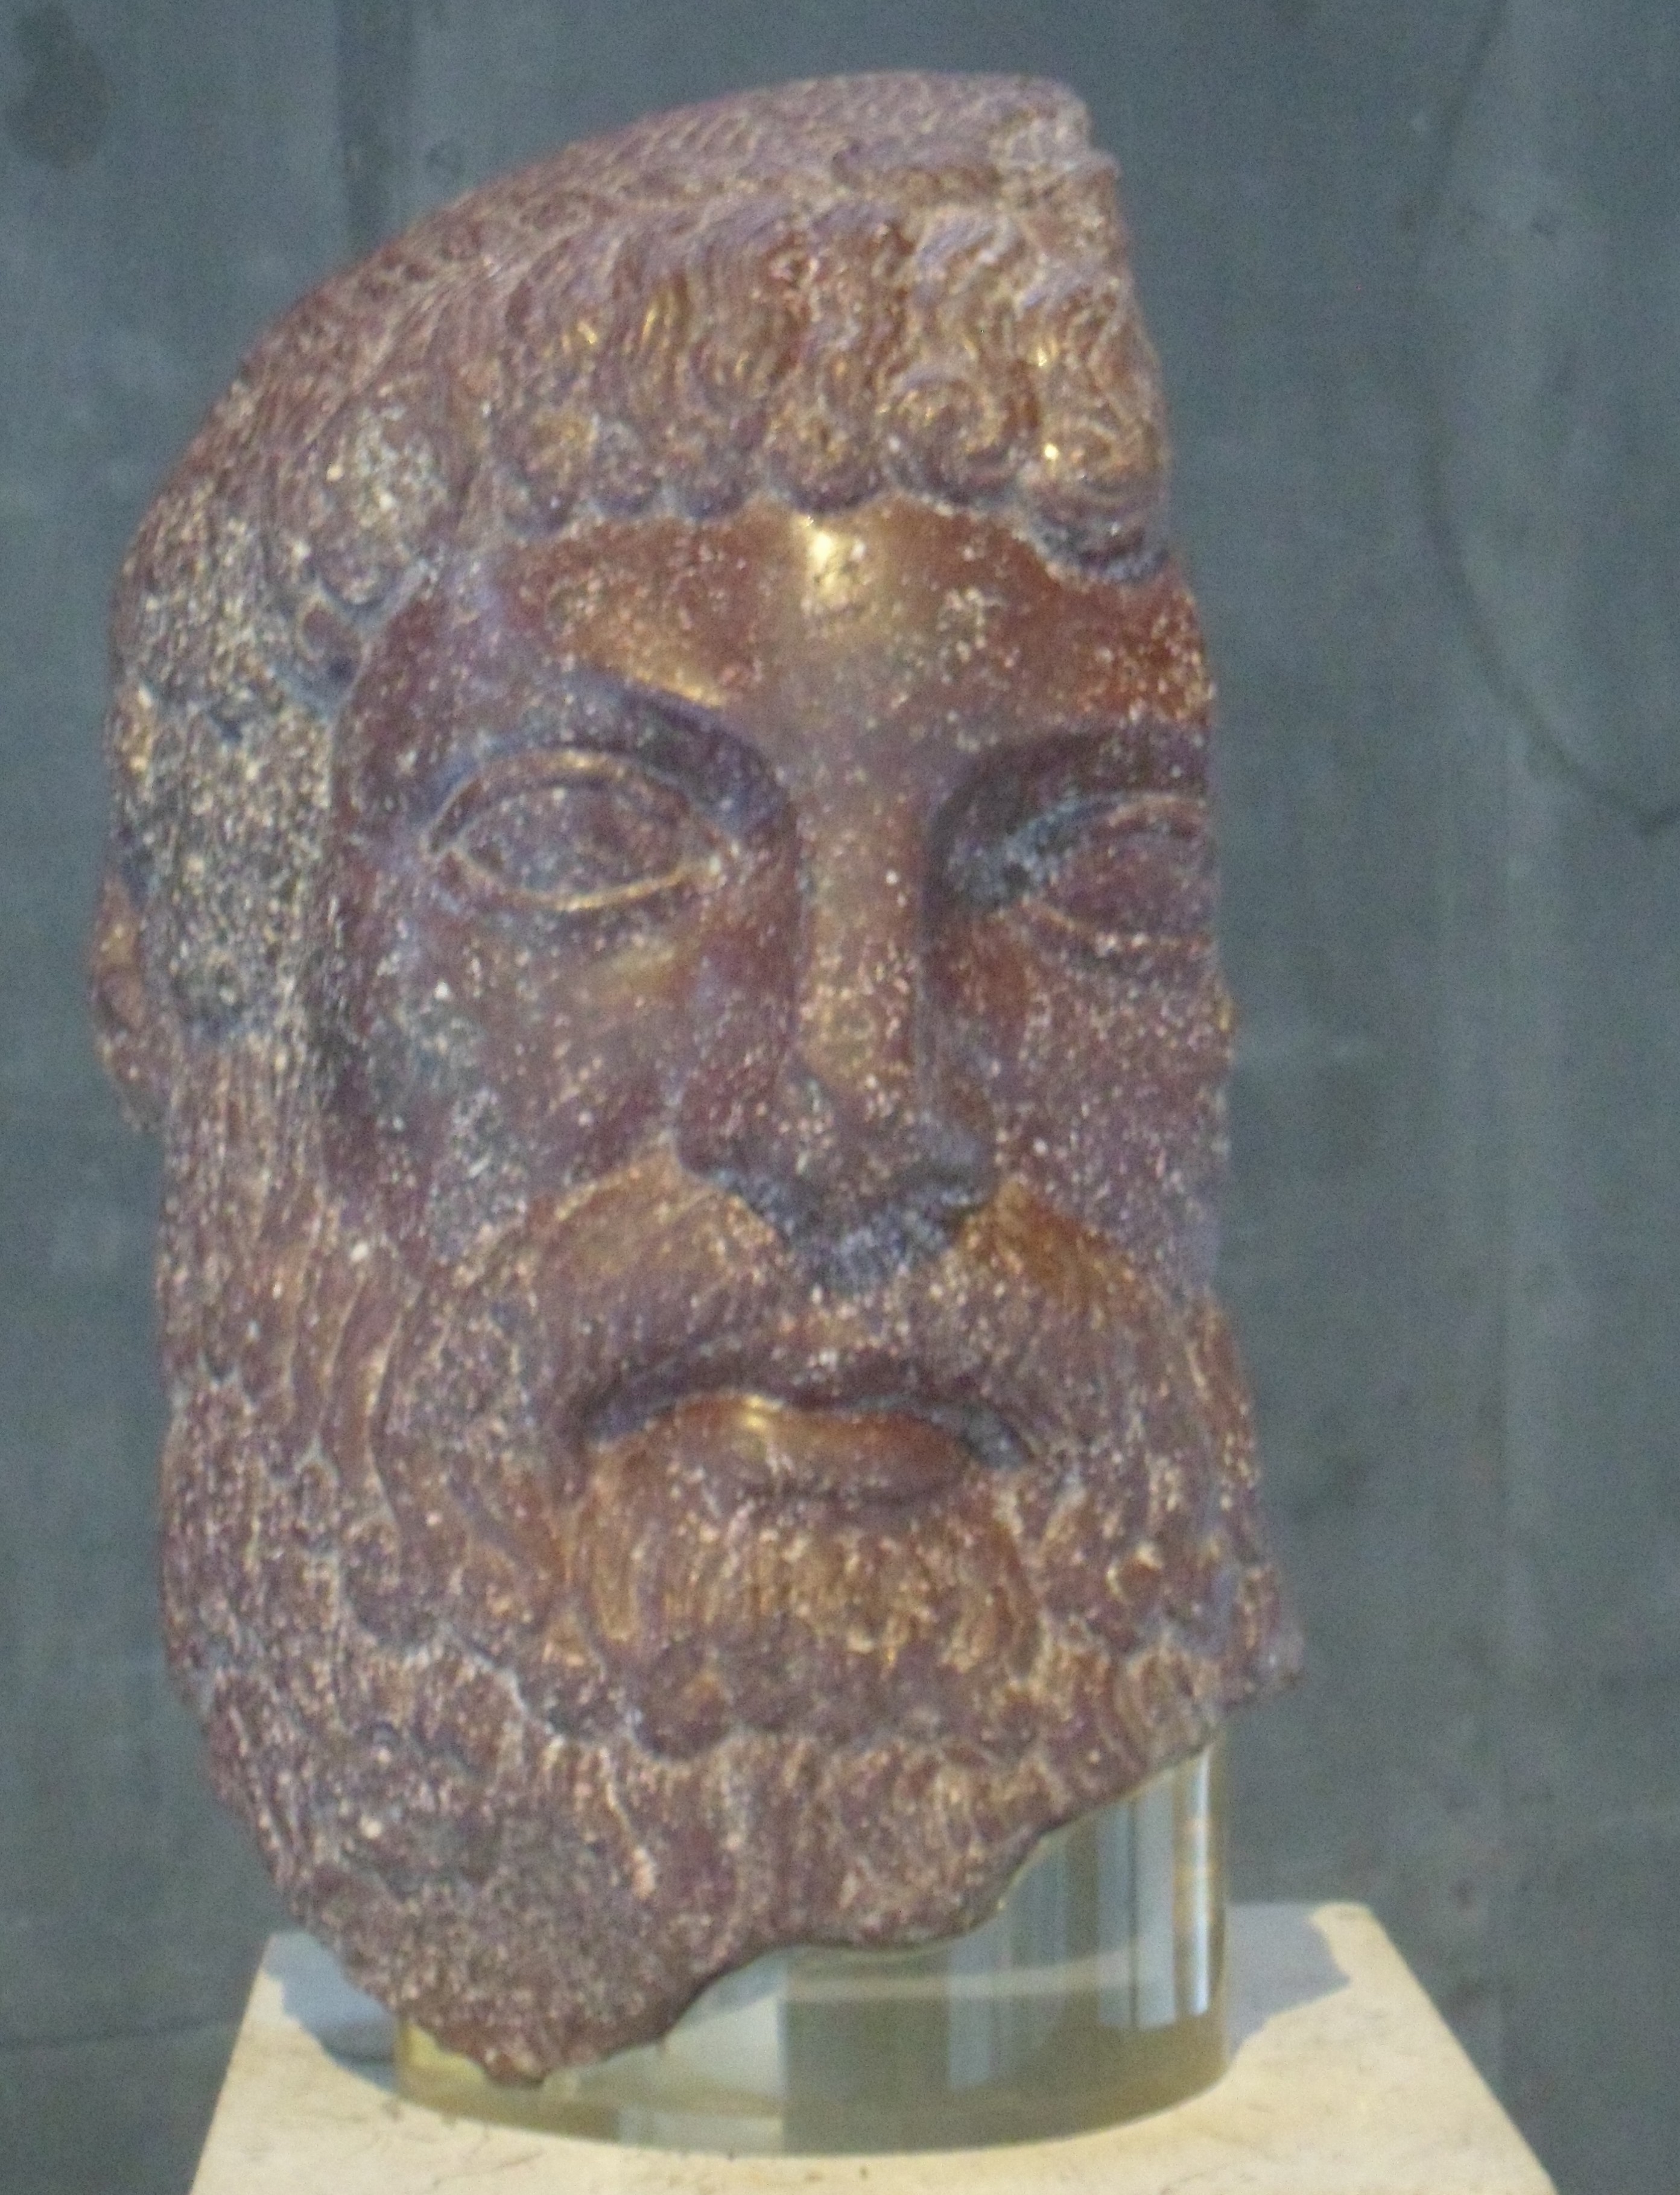 Life-sized head of a bearded man carved of smooth stone